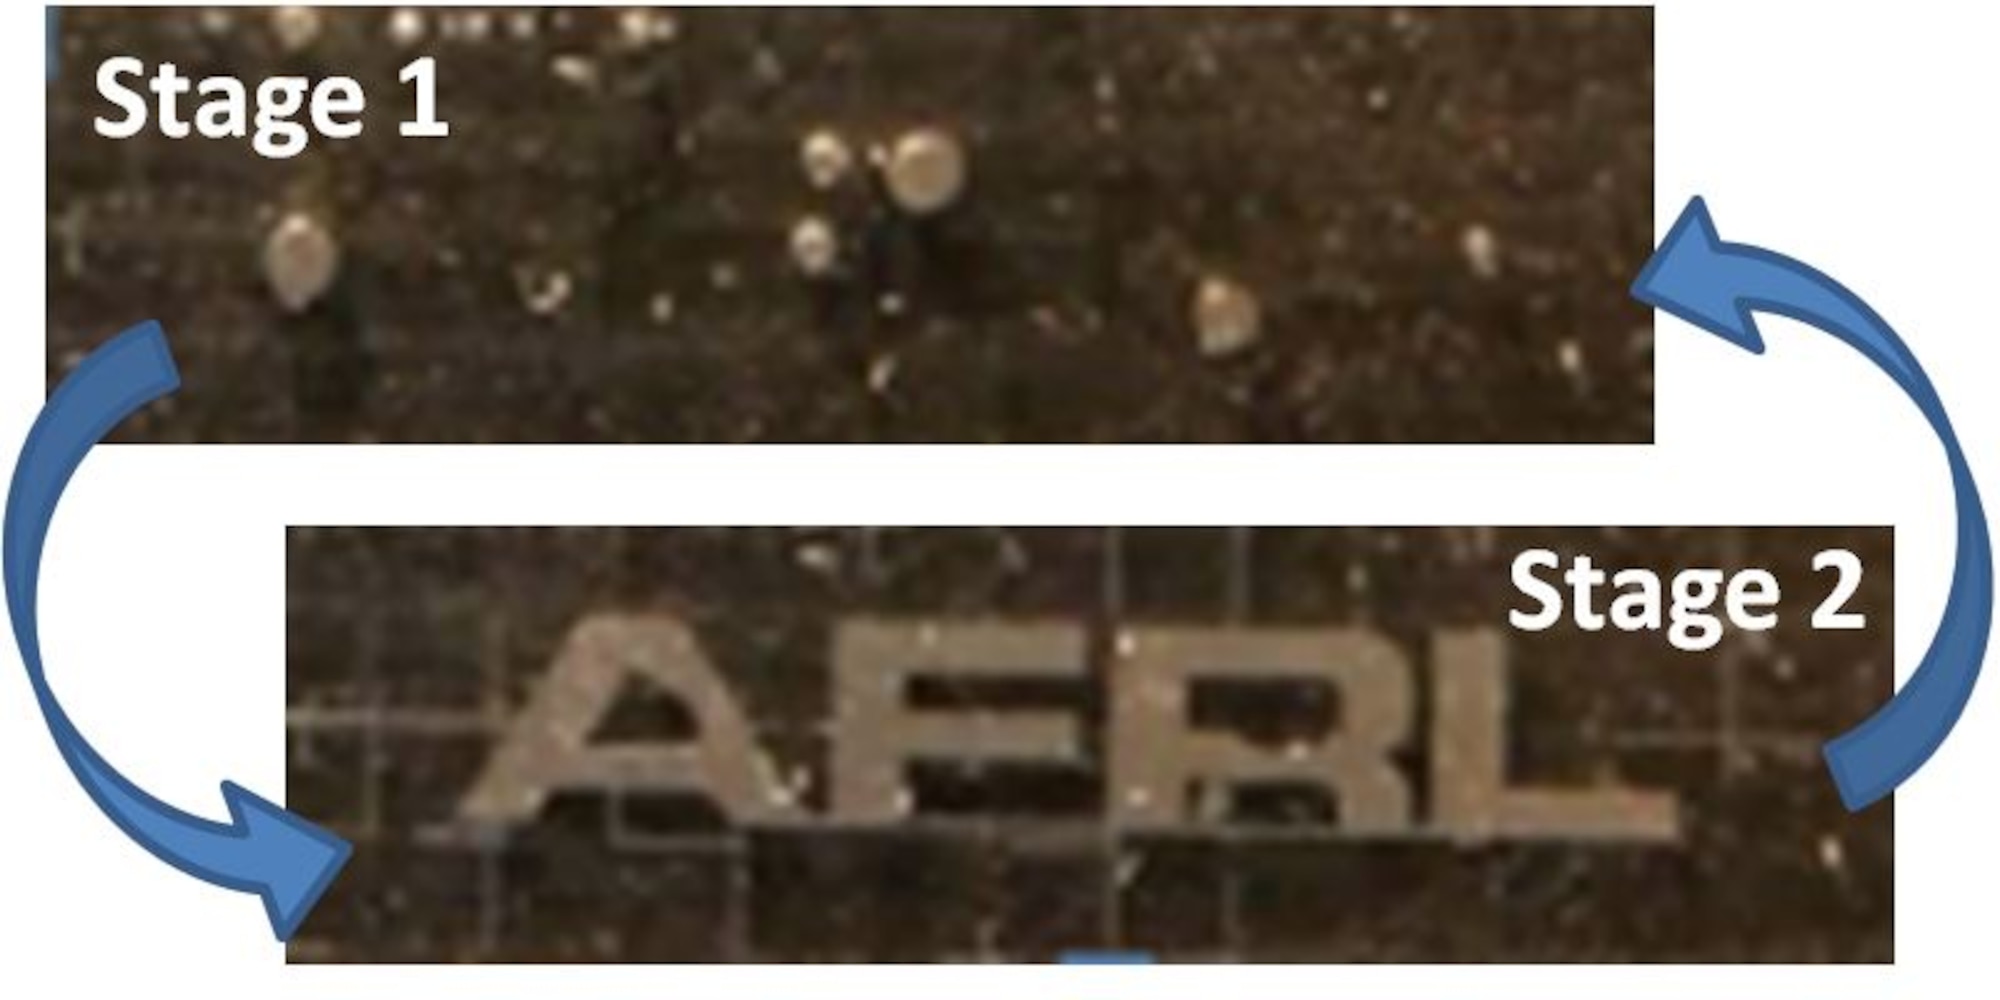 AFRL researchers recently demonstrated the malleability of Gallium Liquid Metal Alloys (GaLMAs). The GaLMA in Stage 1 is balled up. Stage 2 shows this GaLMA has been combined and flattened into the form of the Air Force Research Laboratory’s logo. (U.S. Air Force image)